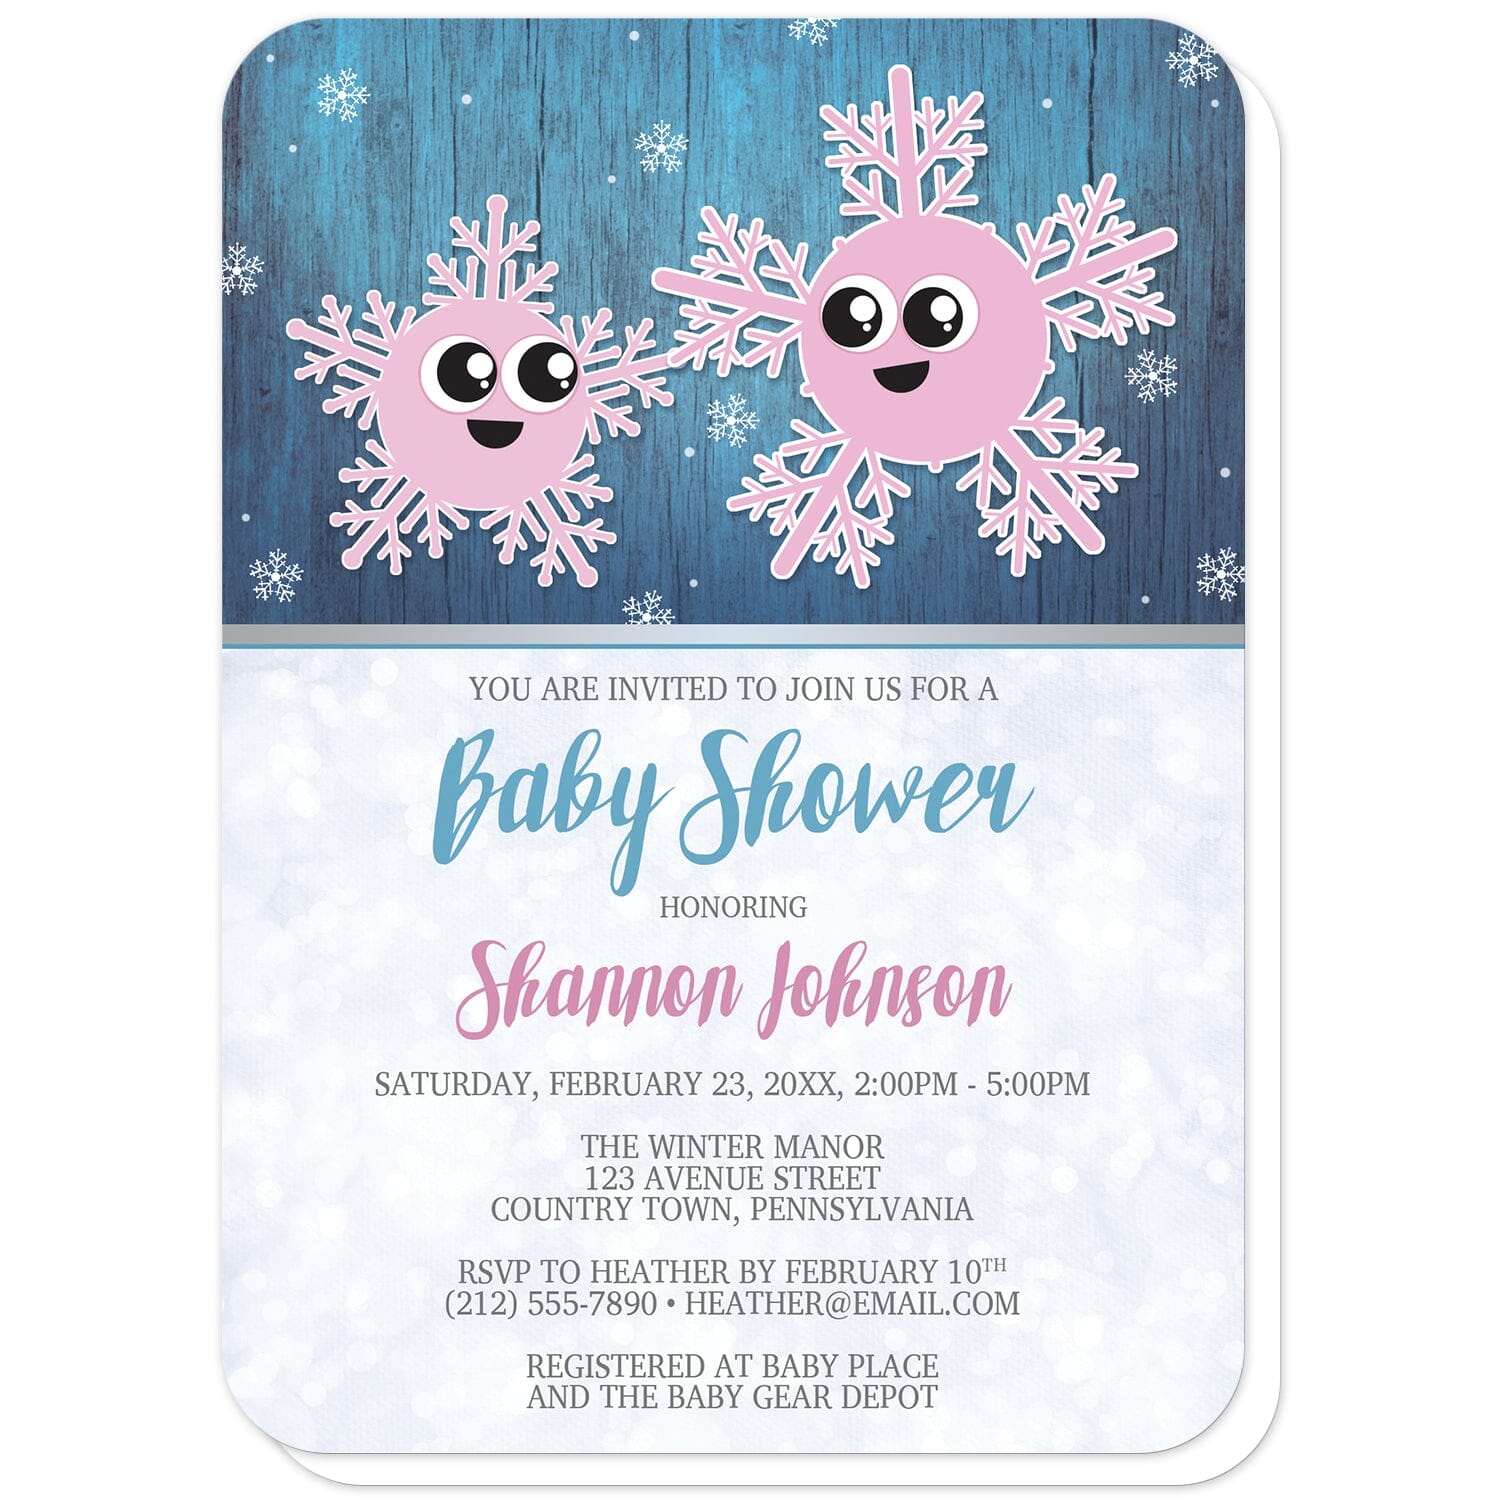 Cute Snowflake Rustic Winter Girl Baby Shower Invitations (with rounded corners) at Artistically Invited. Cute snowflake rustic winter girl baby shower invitations with an adorable illustration of little girl baby snowflake with her pink mommy snowflake. They are displayed over a dark blue background with a wood grain overlay, and smaller white snowflakes floating down.